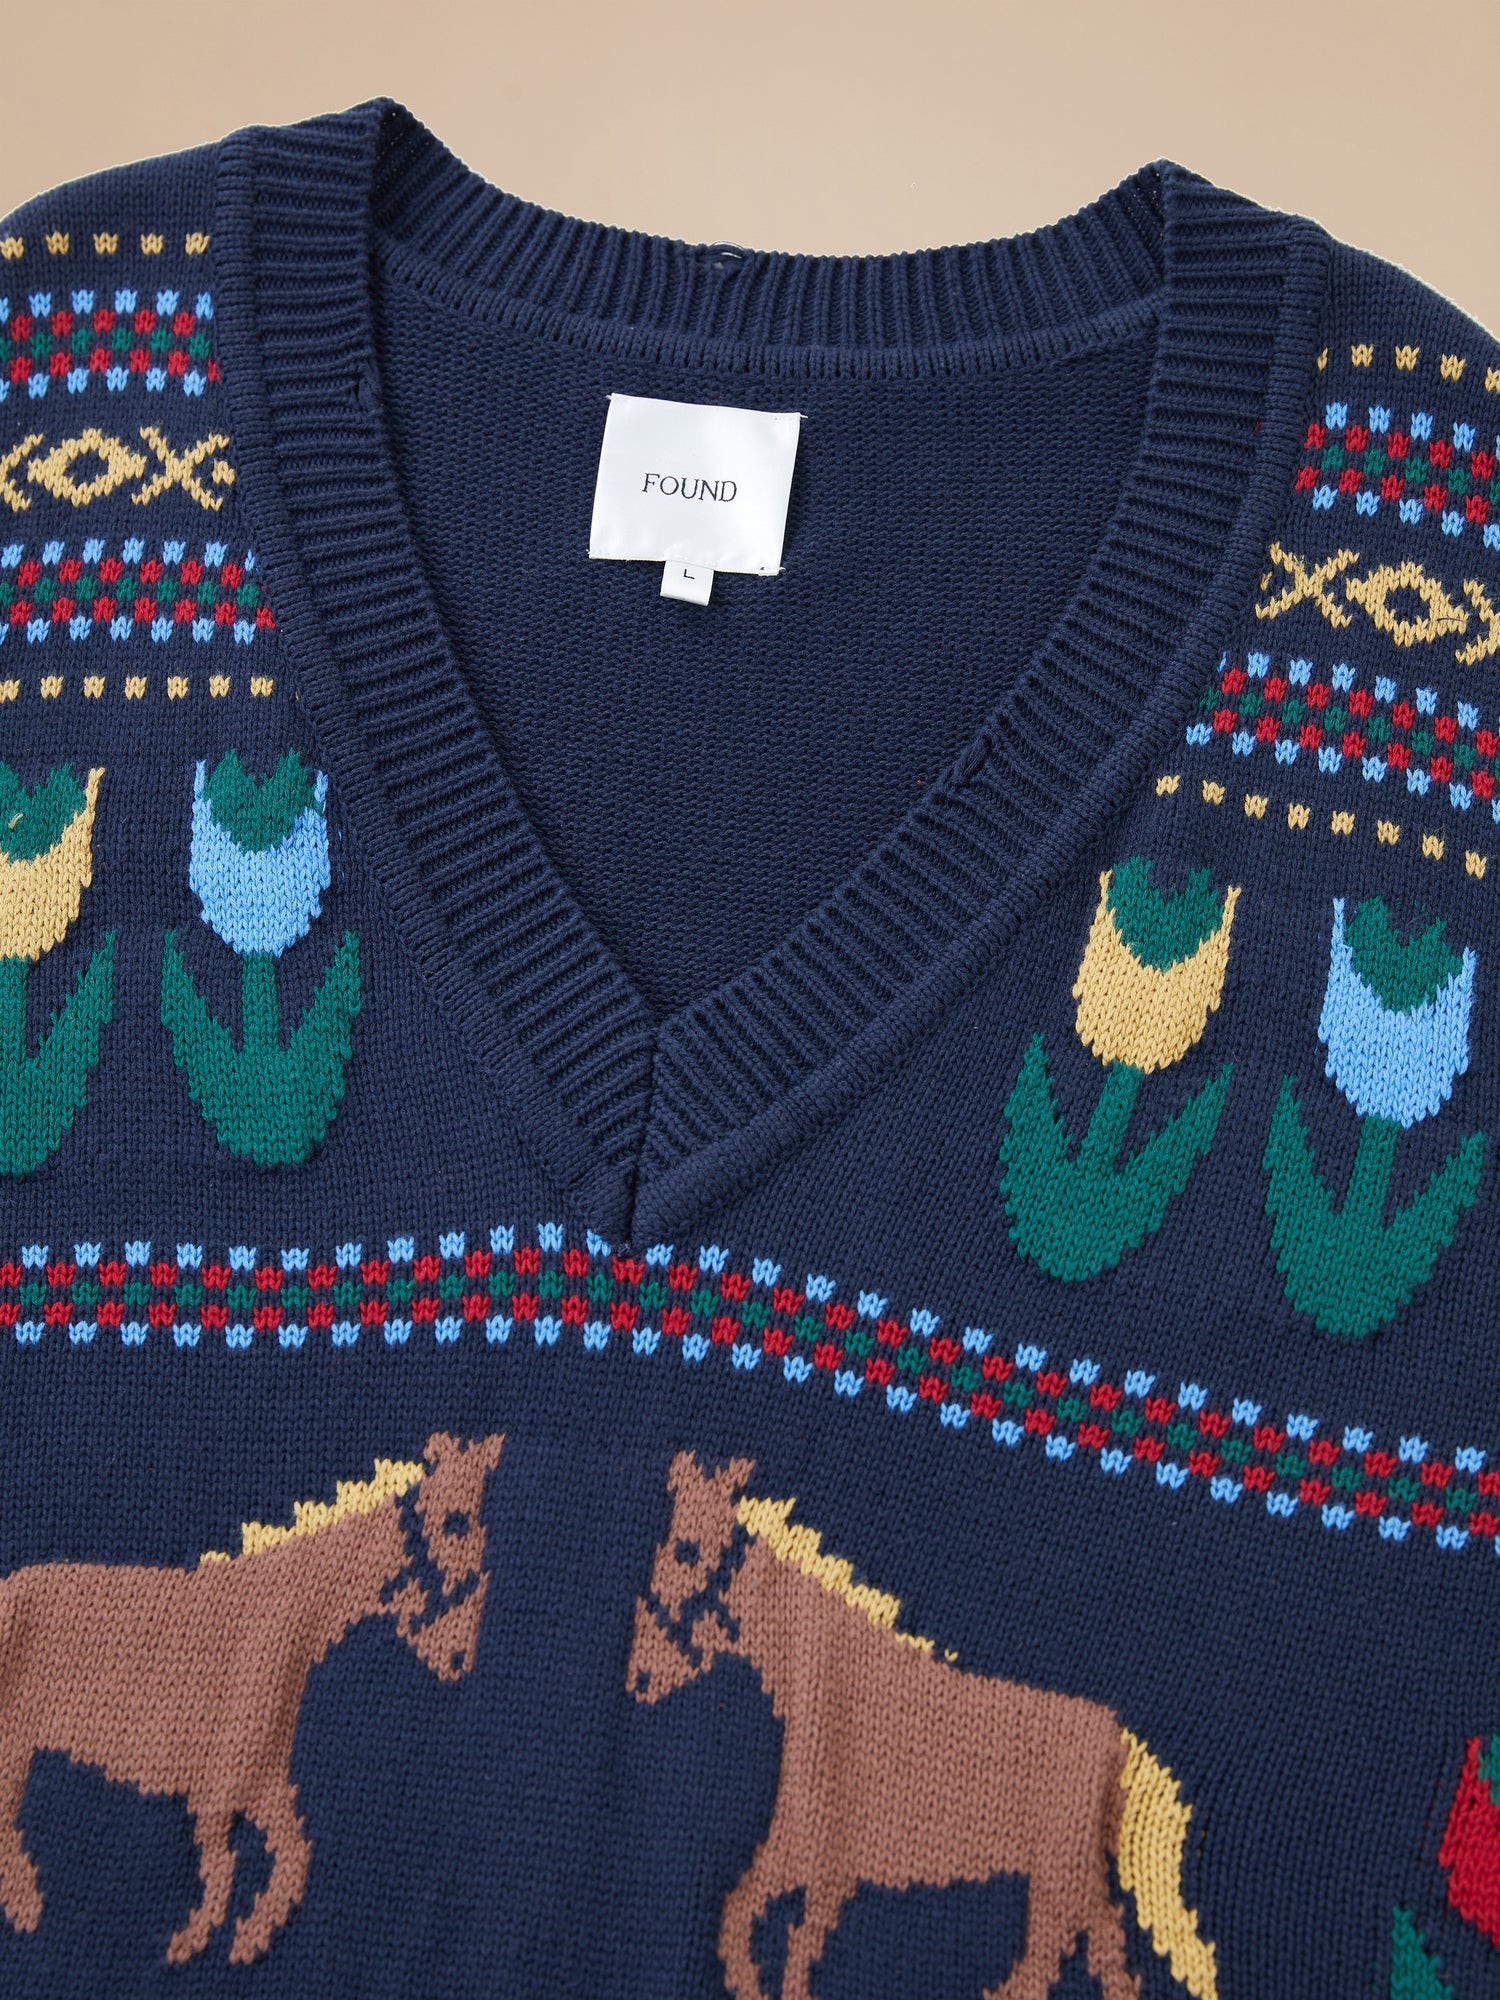 A Found Isle Horse Reverie Sweater Knit Vest with horses on it.